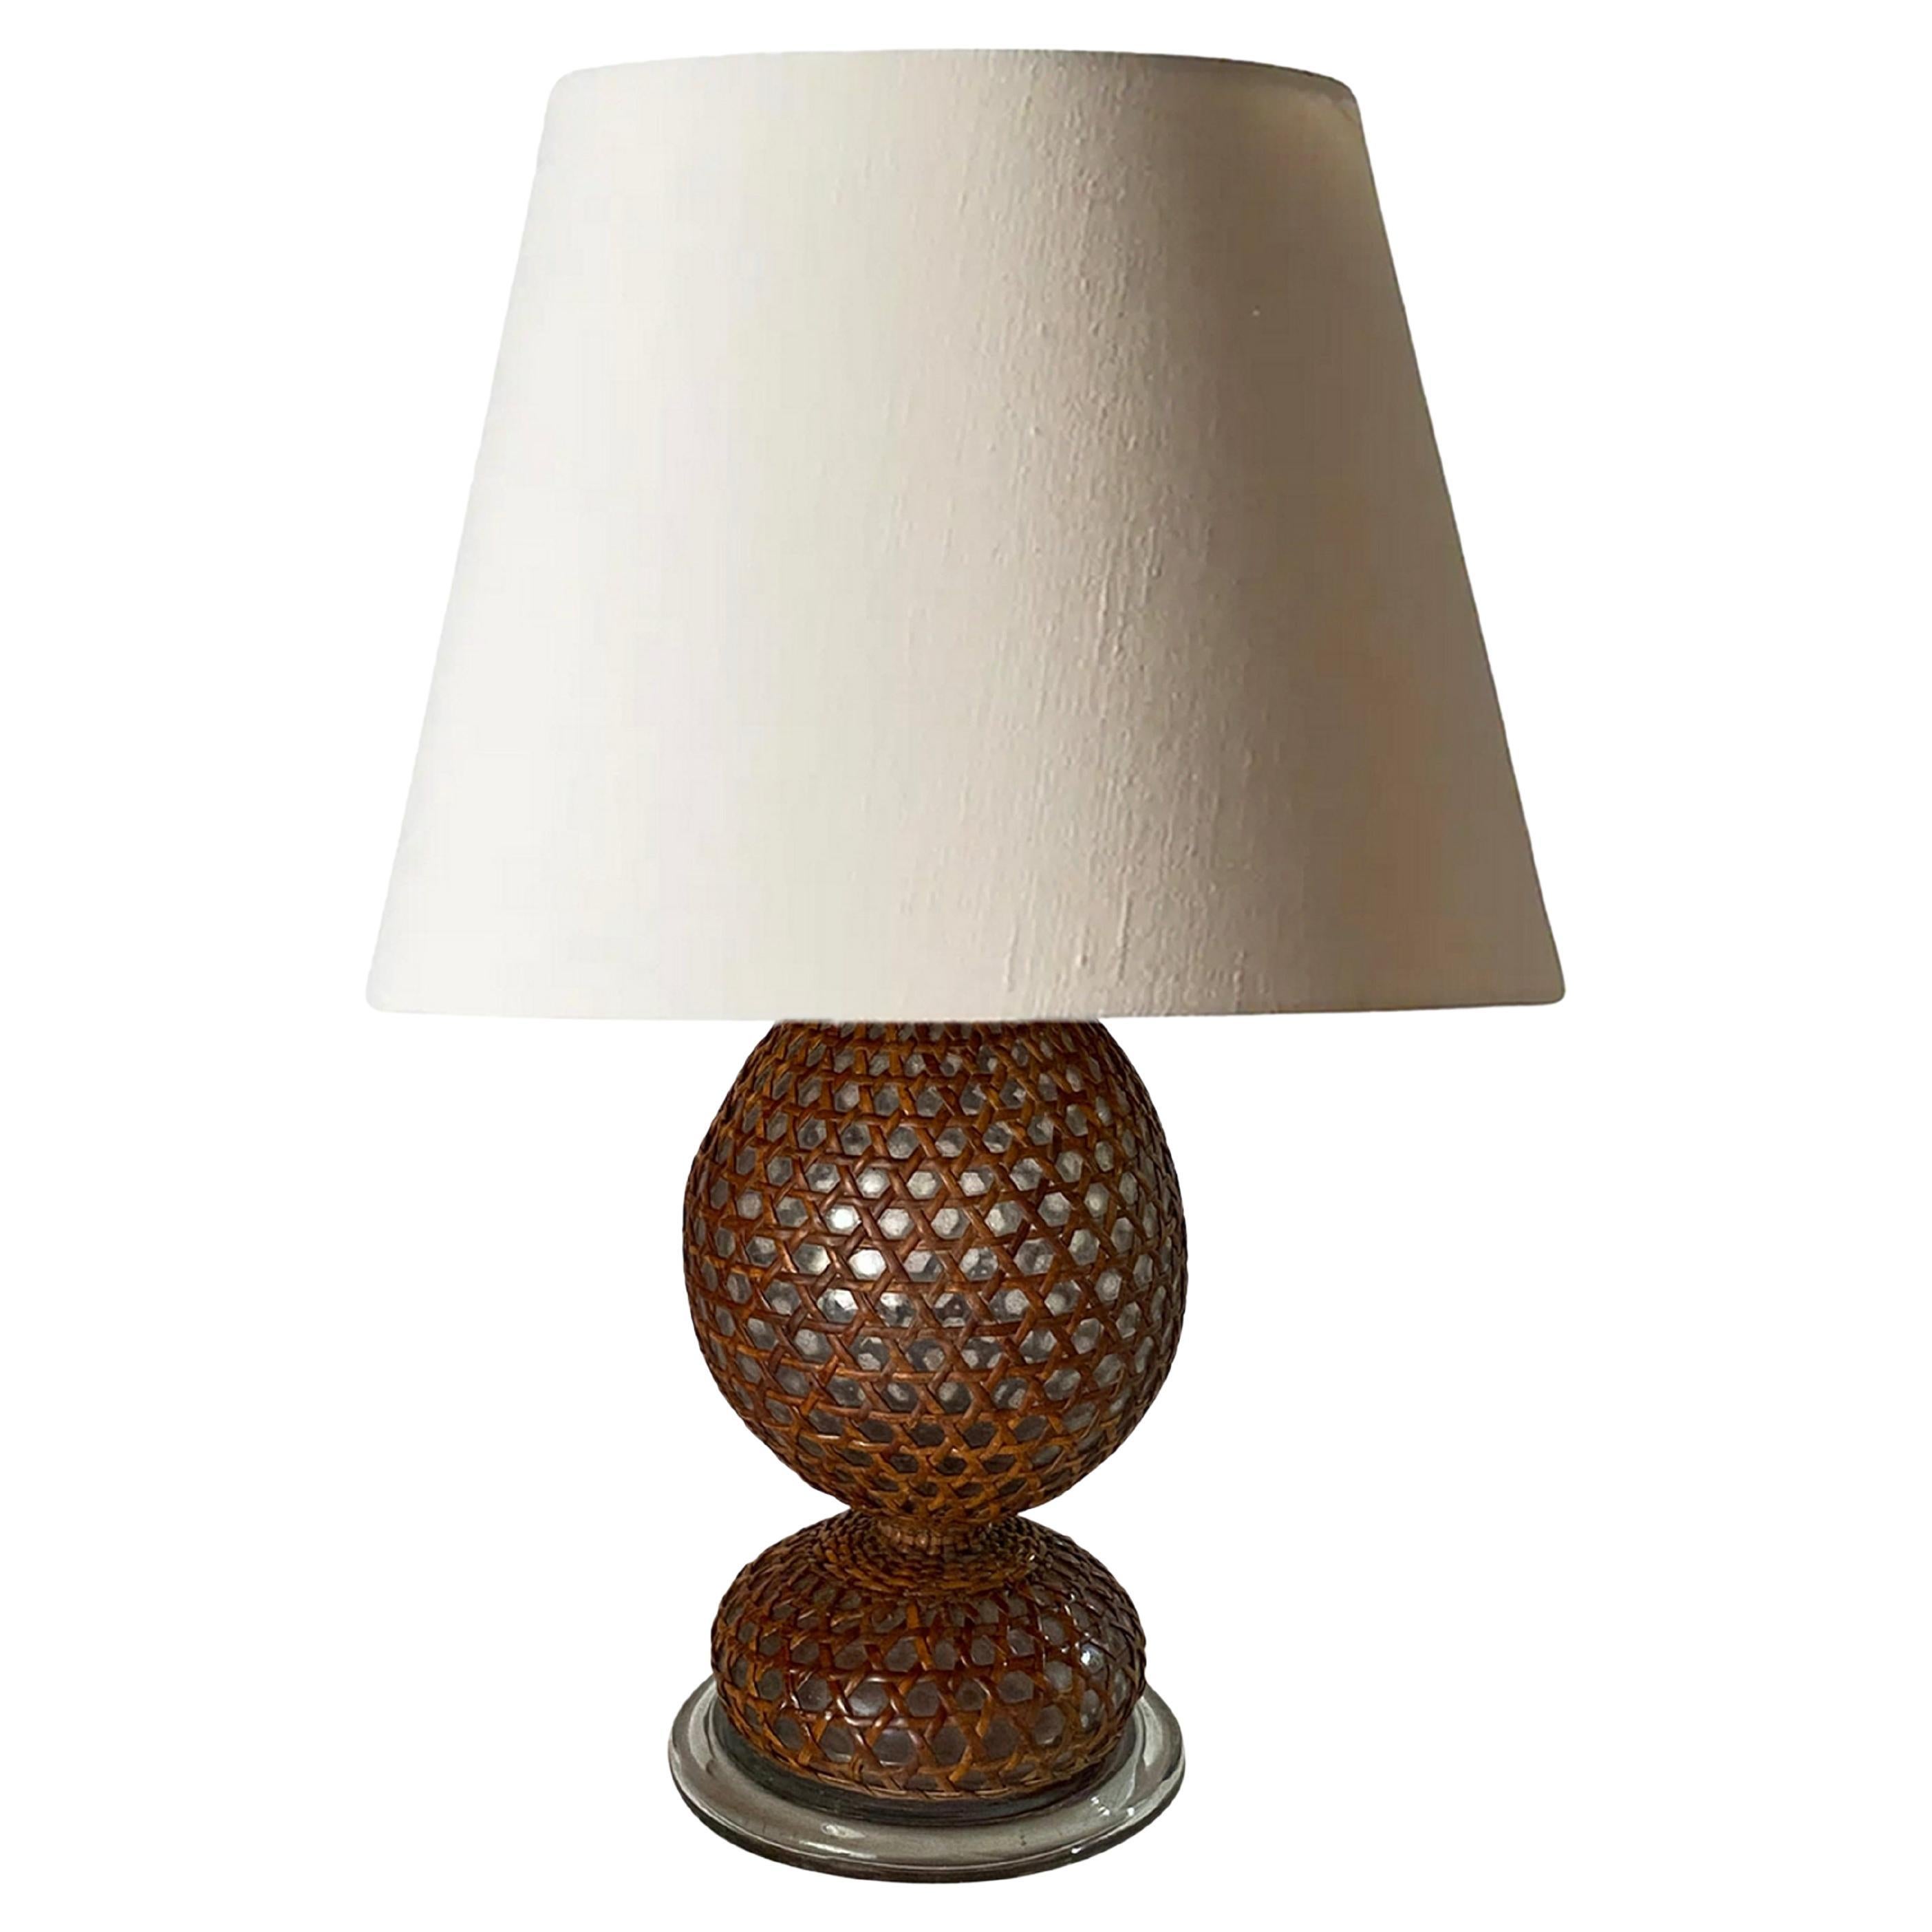 Glass and Rattan Table Lamp, Made in England, Brown Color, Circa 1970